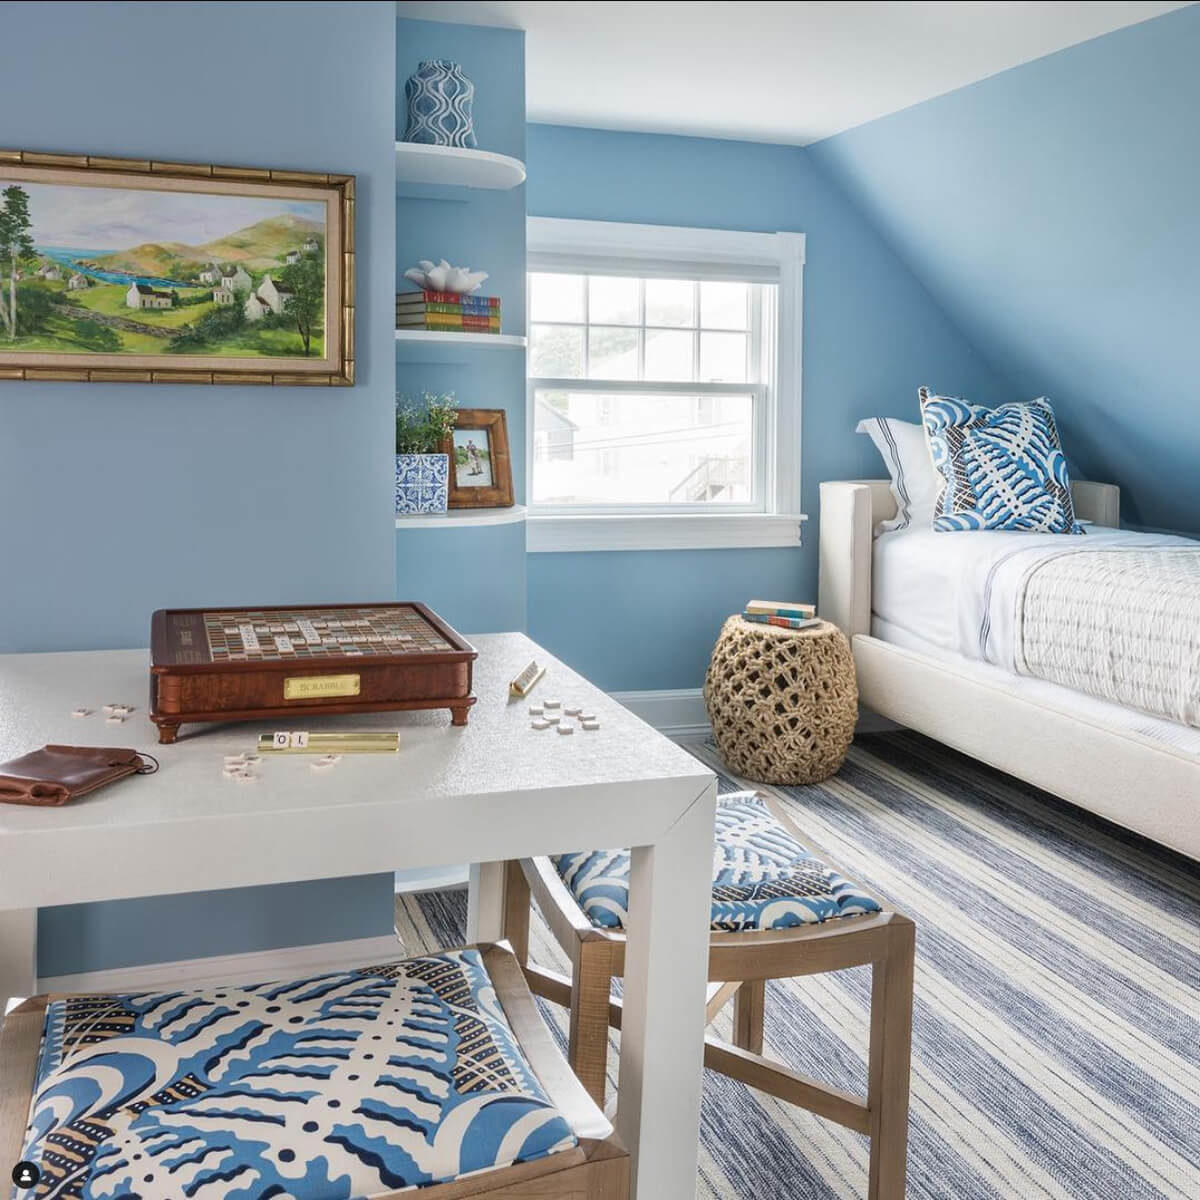 Linen Stripe, Color: Blue/Sand 230/5703 in bedroom iwith furnishings.. Image credit: Digs Design, Newport, RI